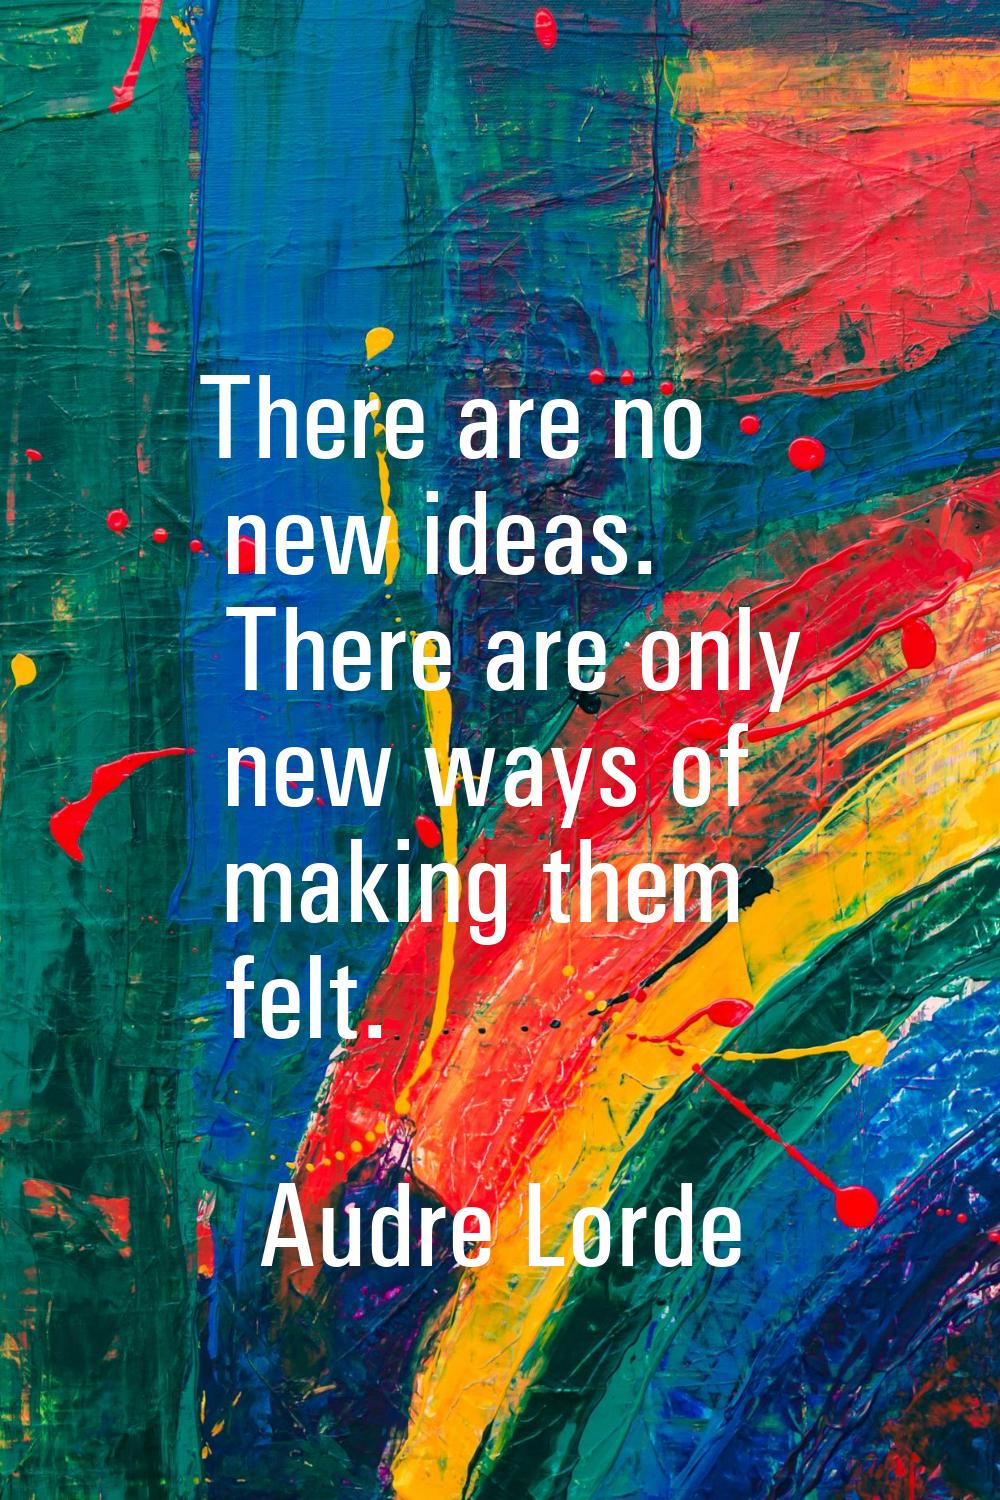 There are no new ideas. There are only new ways of making them felt.